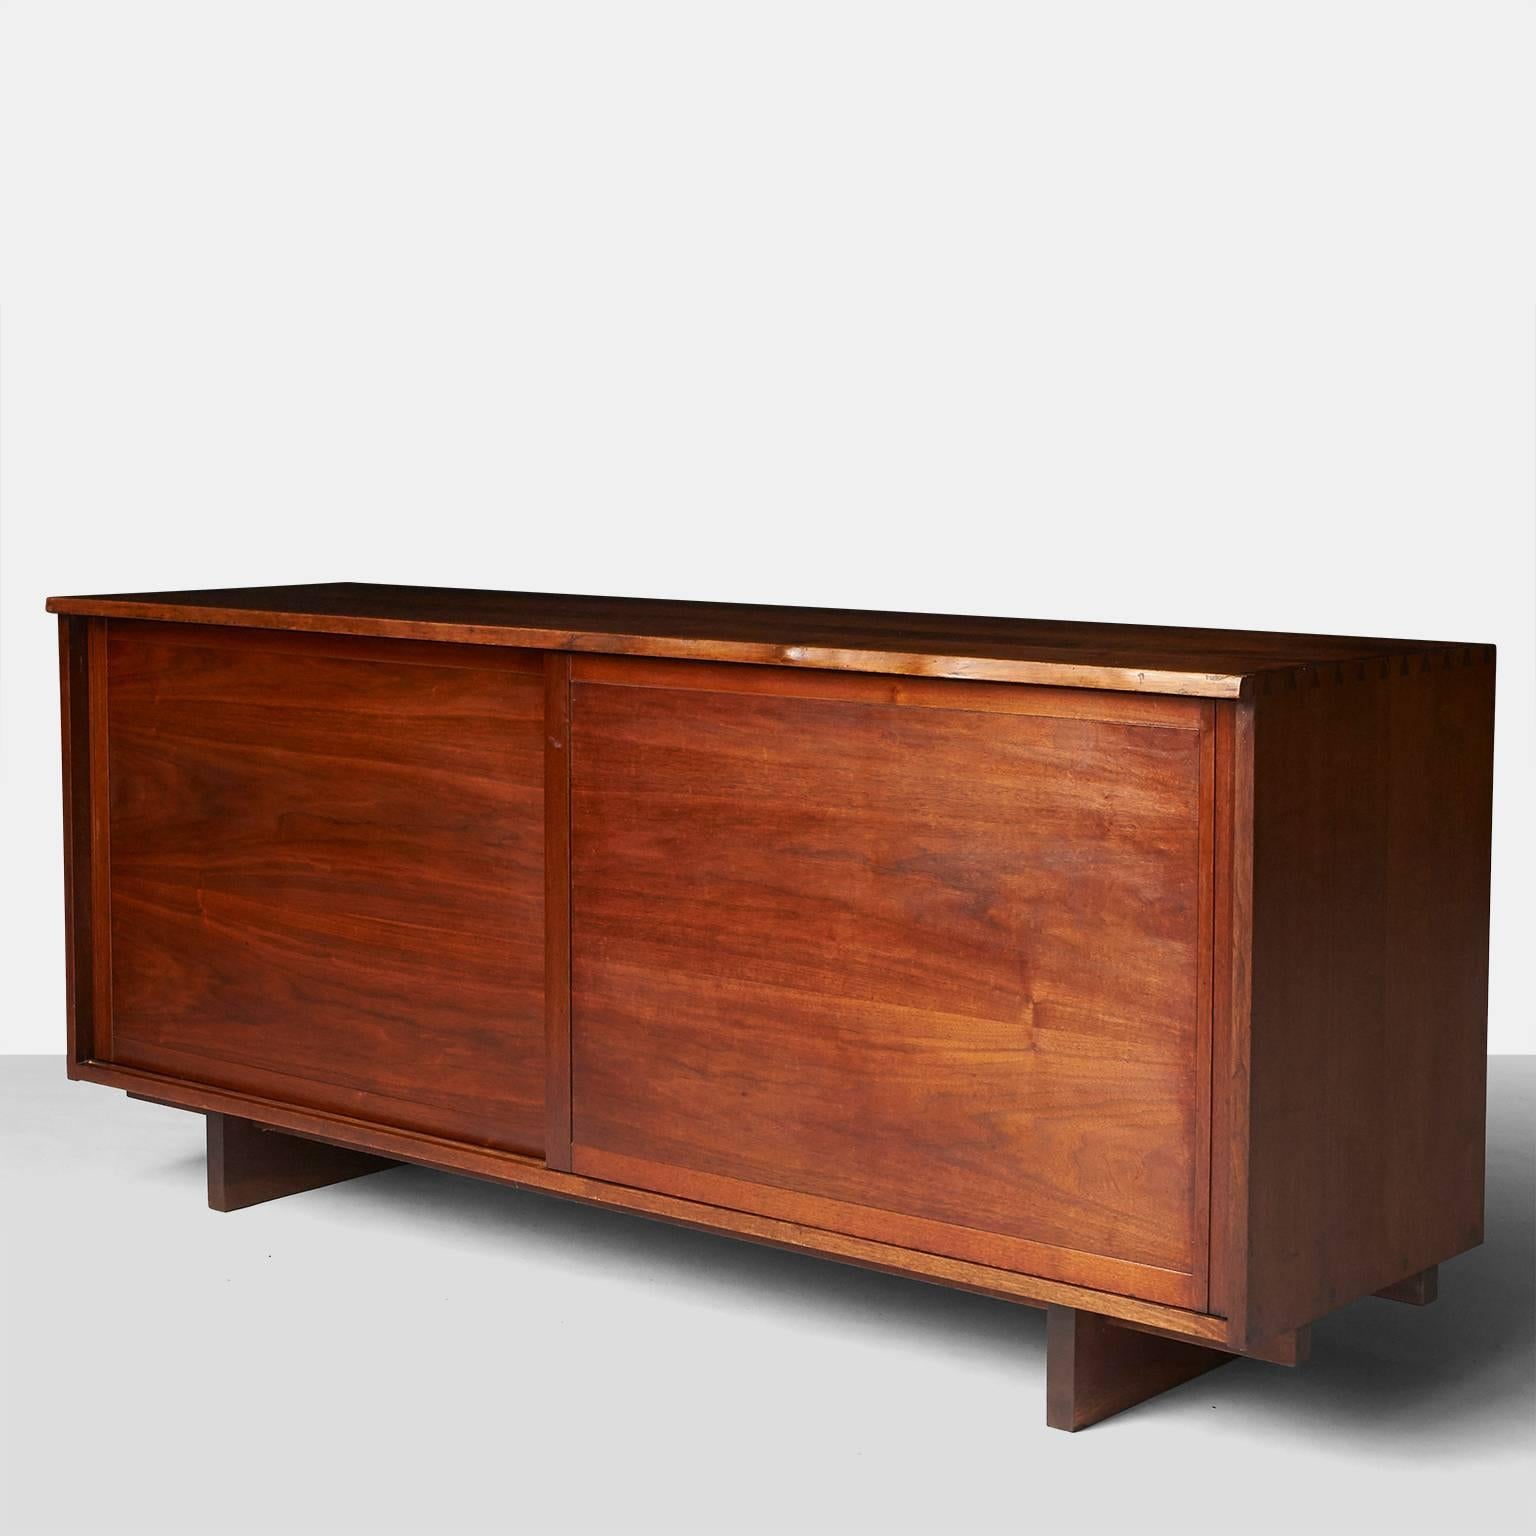 A credenza by George Nakashima in walnut with two bypassing doors and a live front top edge. The interior left side has four pull-out drawers and the right side with two adjustable shelves and one pull-out shelf.
The cabinet is signed with the